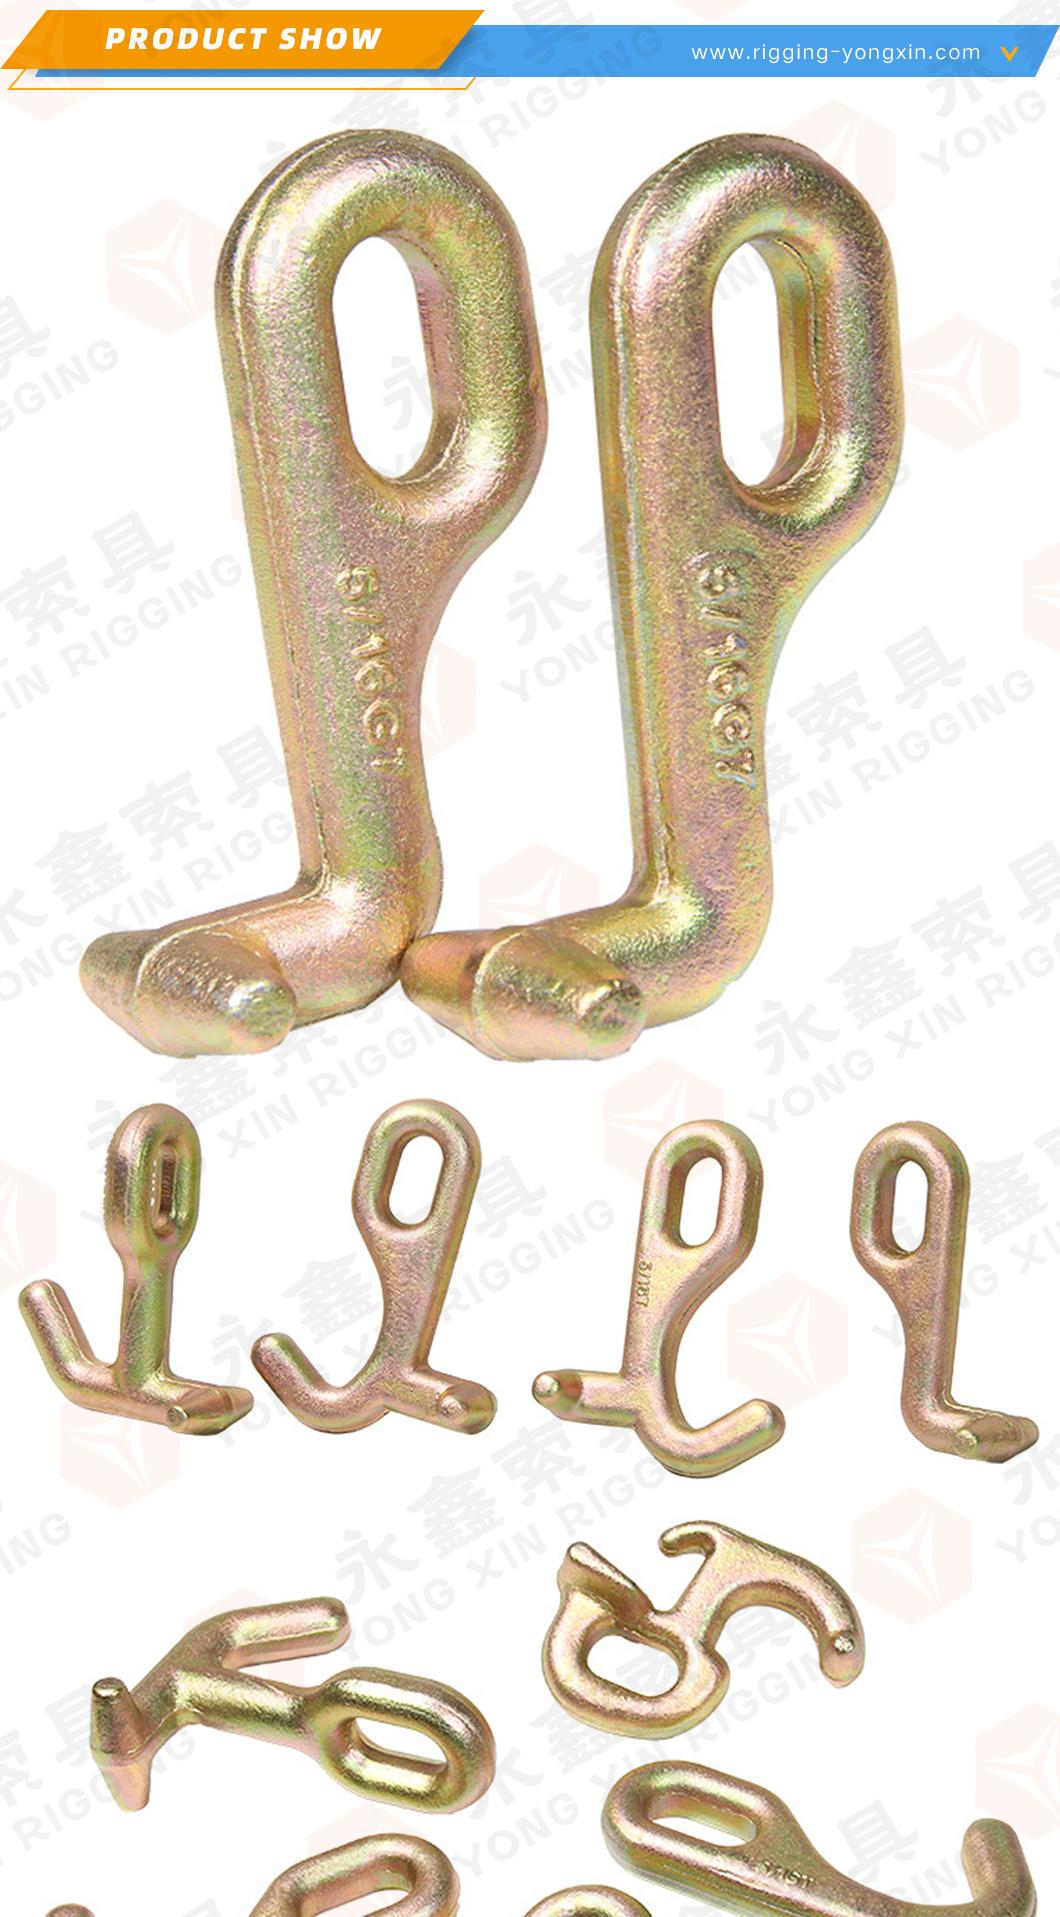 Factory Standard 5/16" Grade 70 G70 Forged 4700 Lbs 15inch Towing J-Hooks, 4inch J and T-Hook Towing Chain Bridle Rtj Clusters